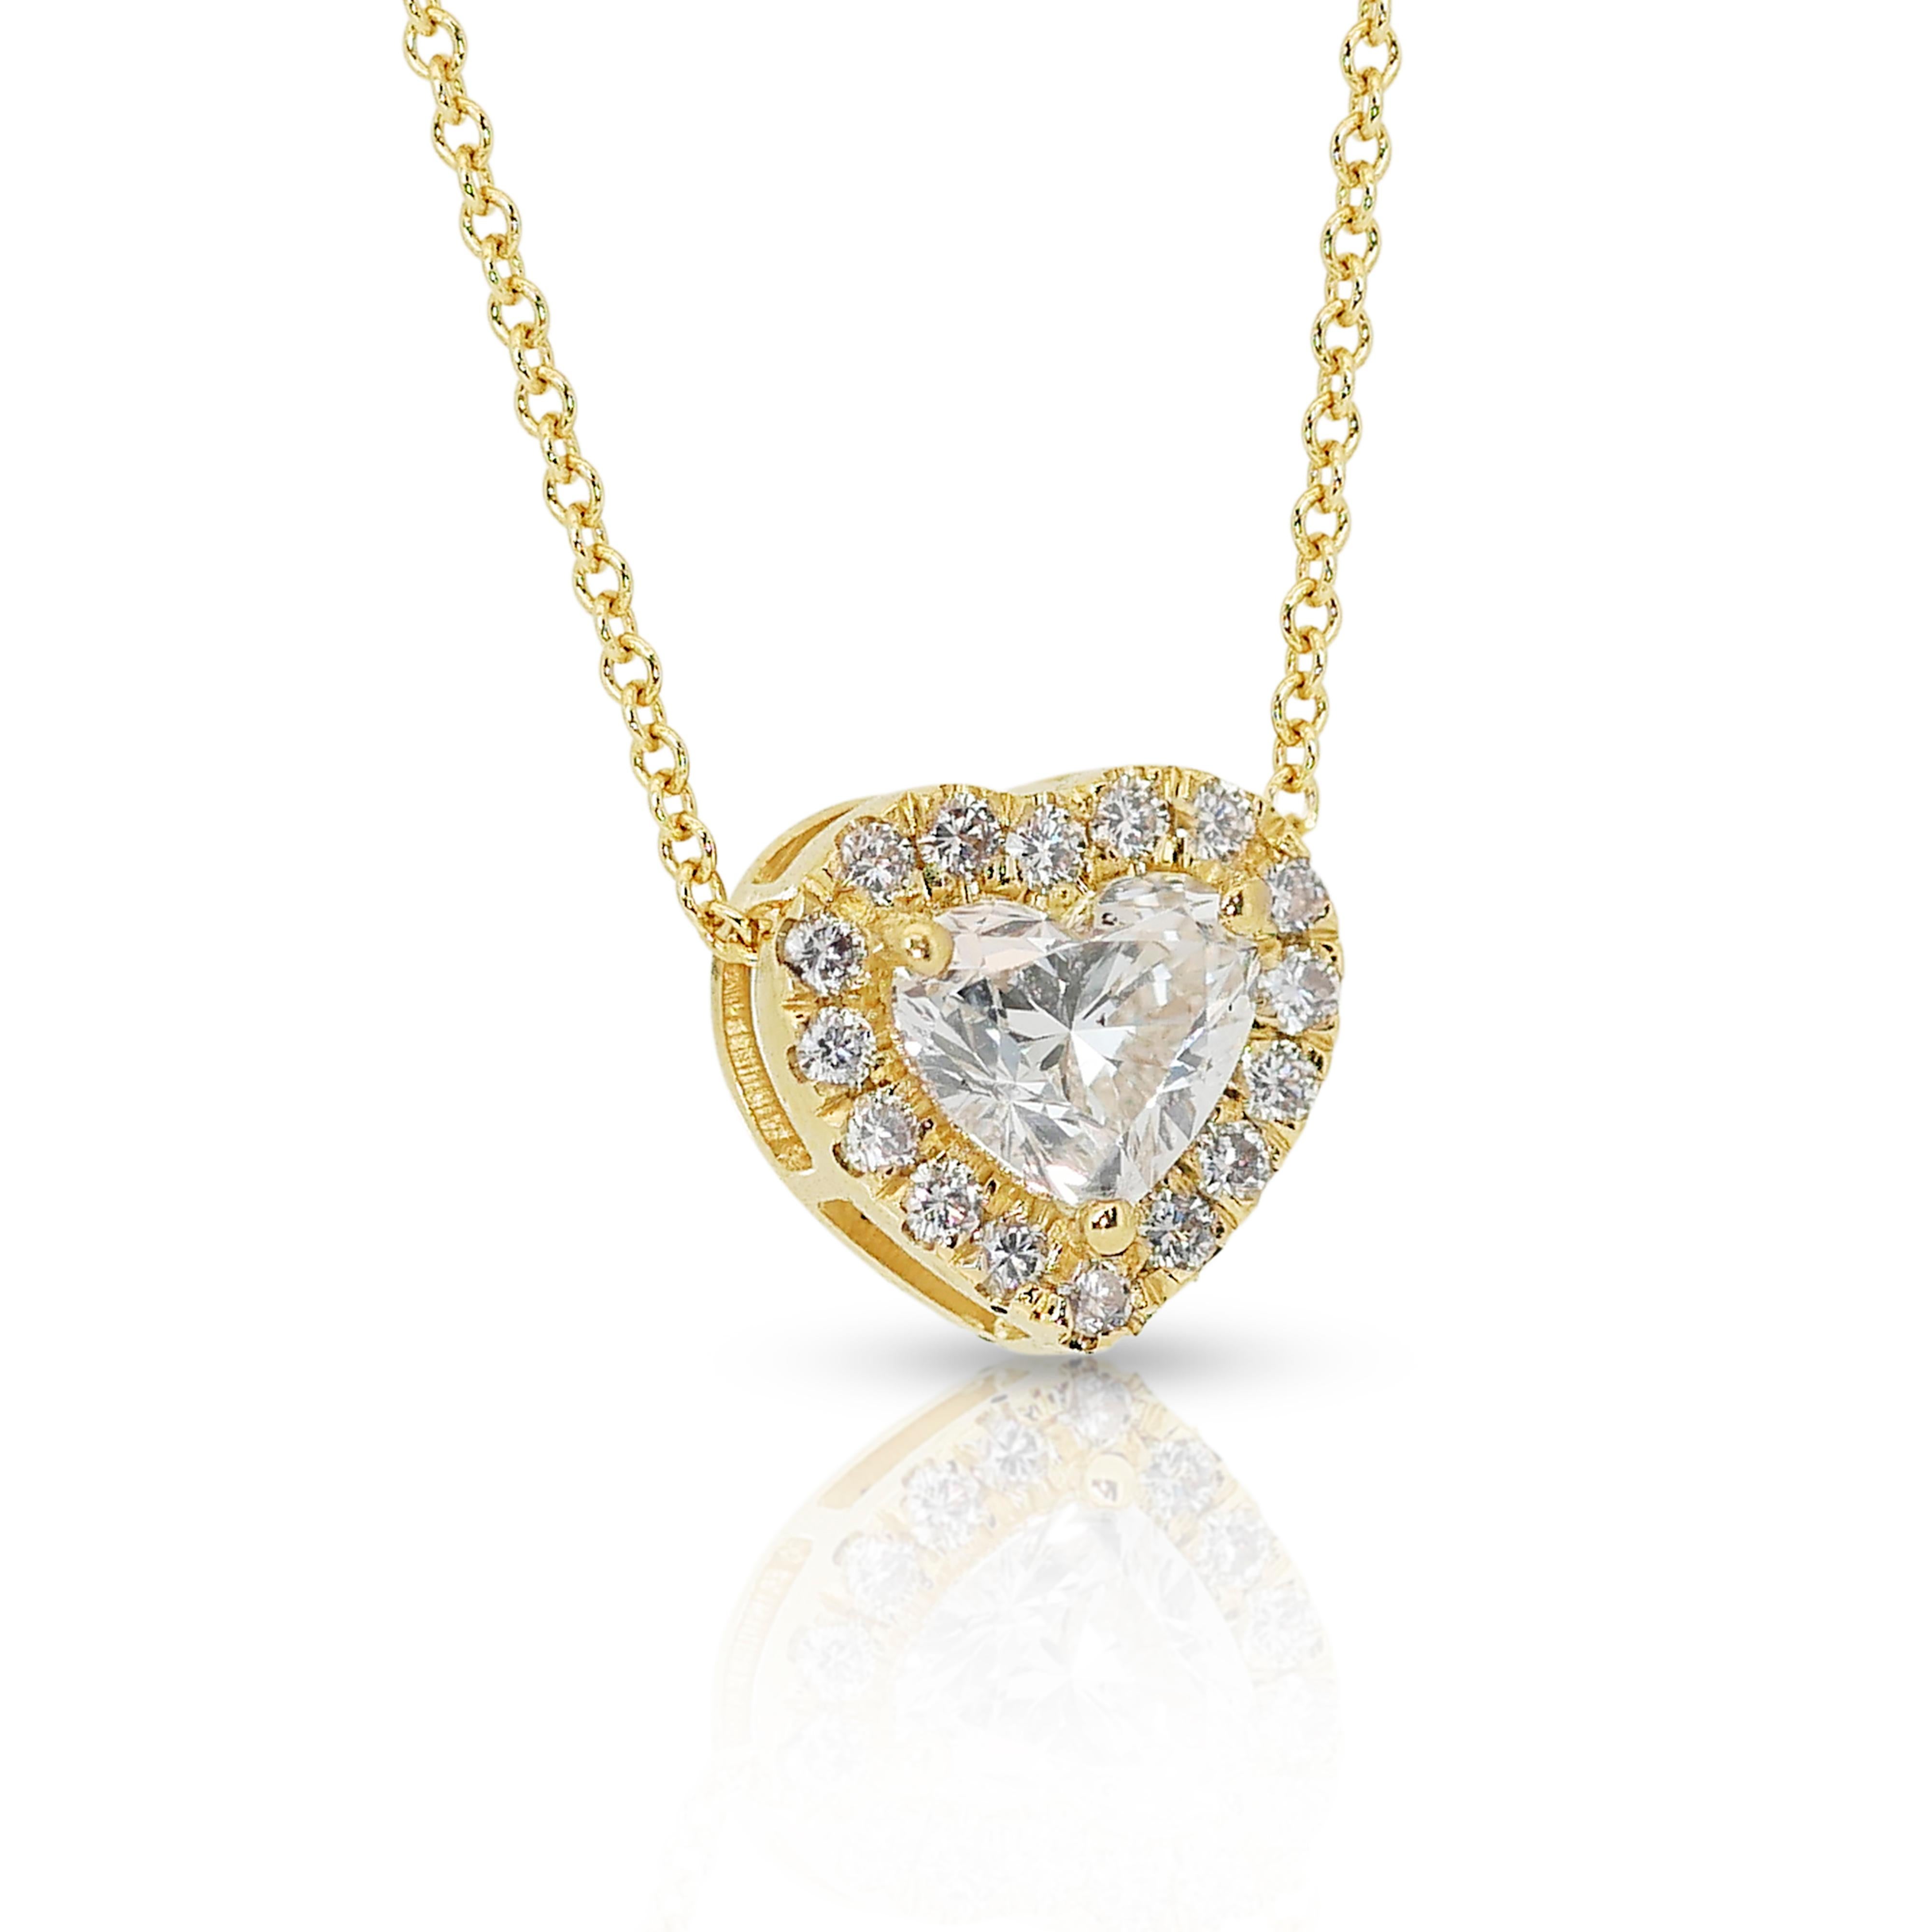 Brilliant 1.28ct Diamonds Halo Necklace in 18k Yellow Gold - IGI Certified

Unveil the essence of love with this captivating 18k yellow gold halo necklace, featuring a 1.03-carat heart-shaped diamond that symbolizes romance and affection. Adding to